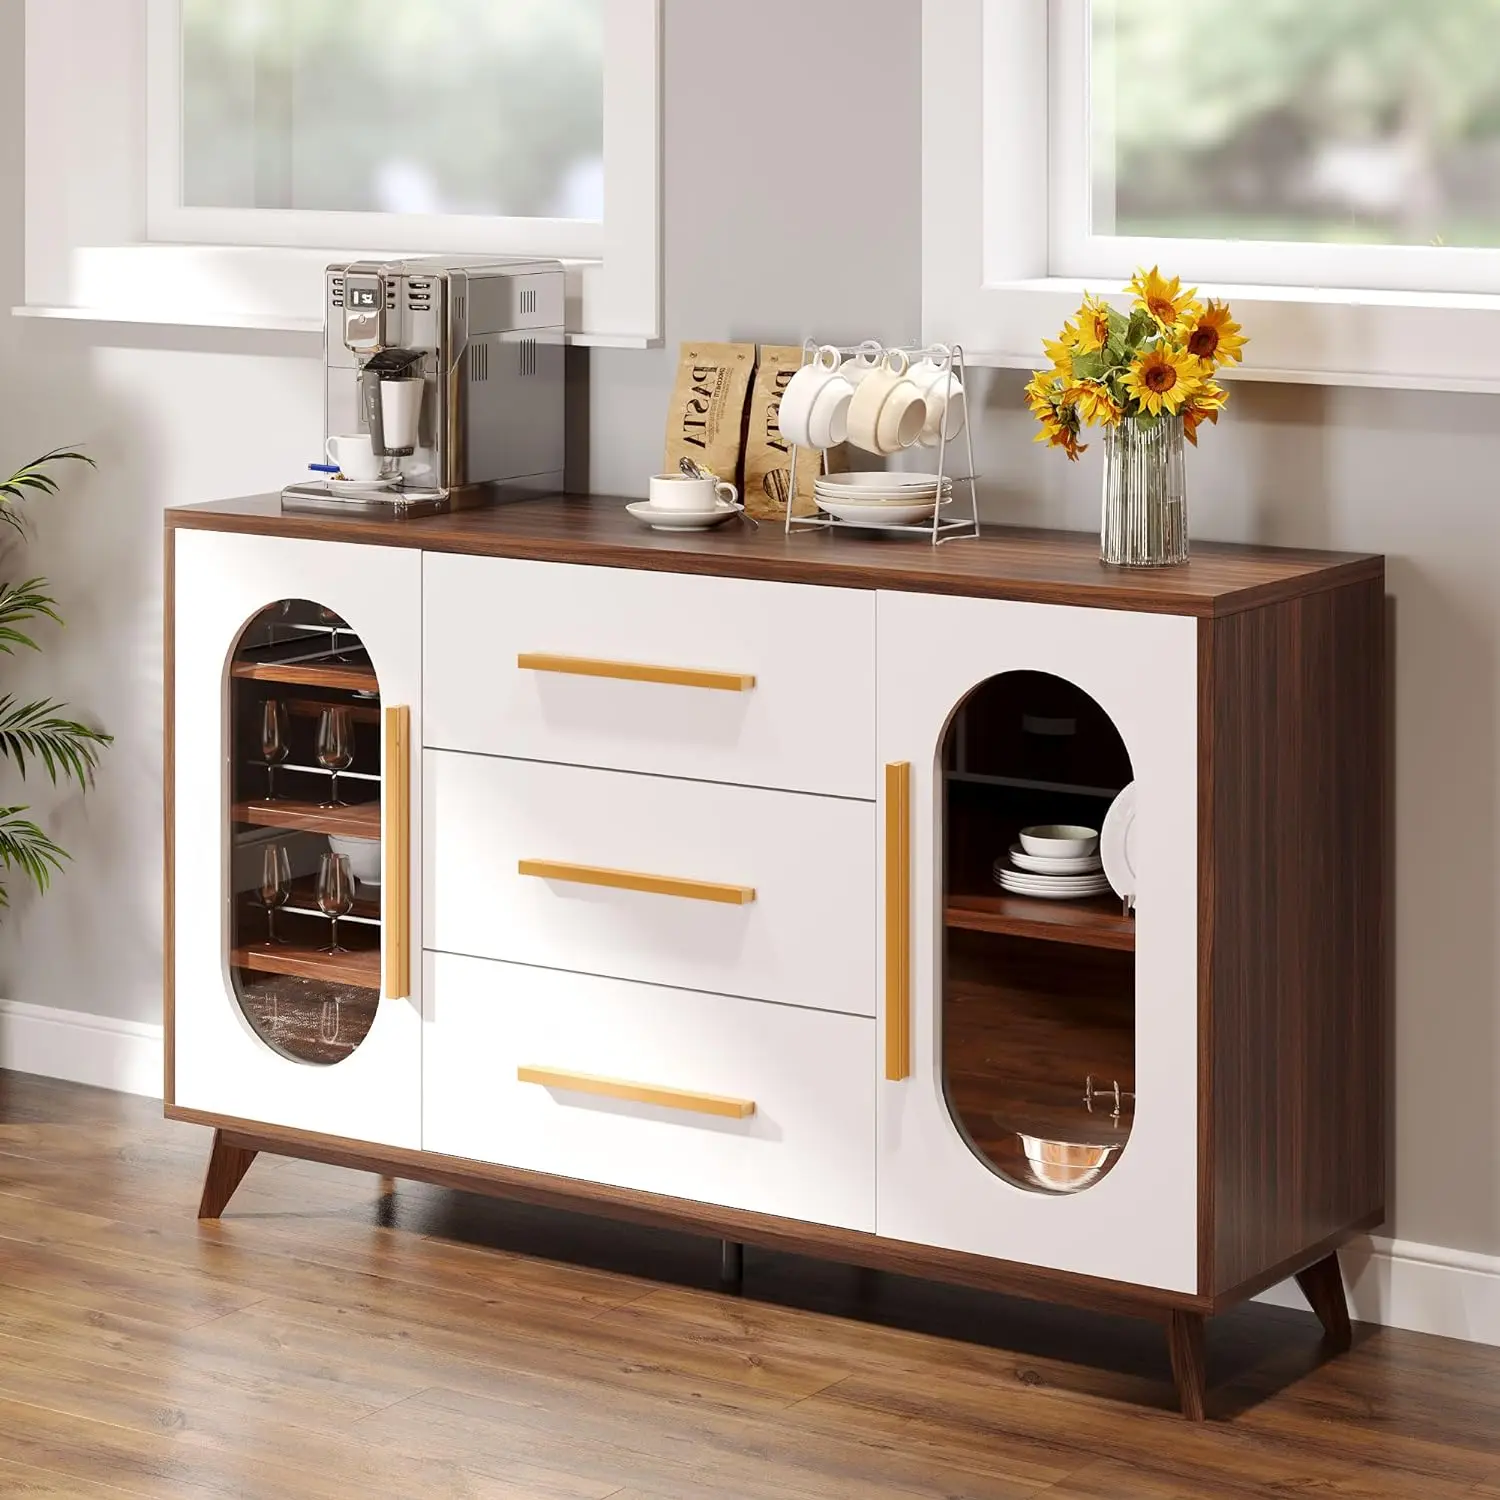 

DWVO Storage Cabinet, 59'' Sideboard Buffet Cabinet with Storage, Coffee Bar Cabinet with 3 Drawers, 2 Glass Doors